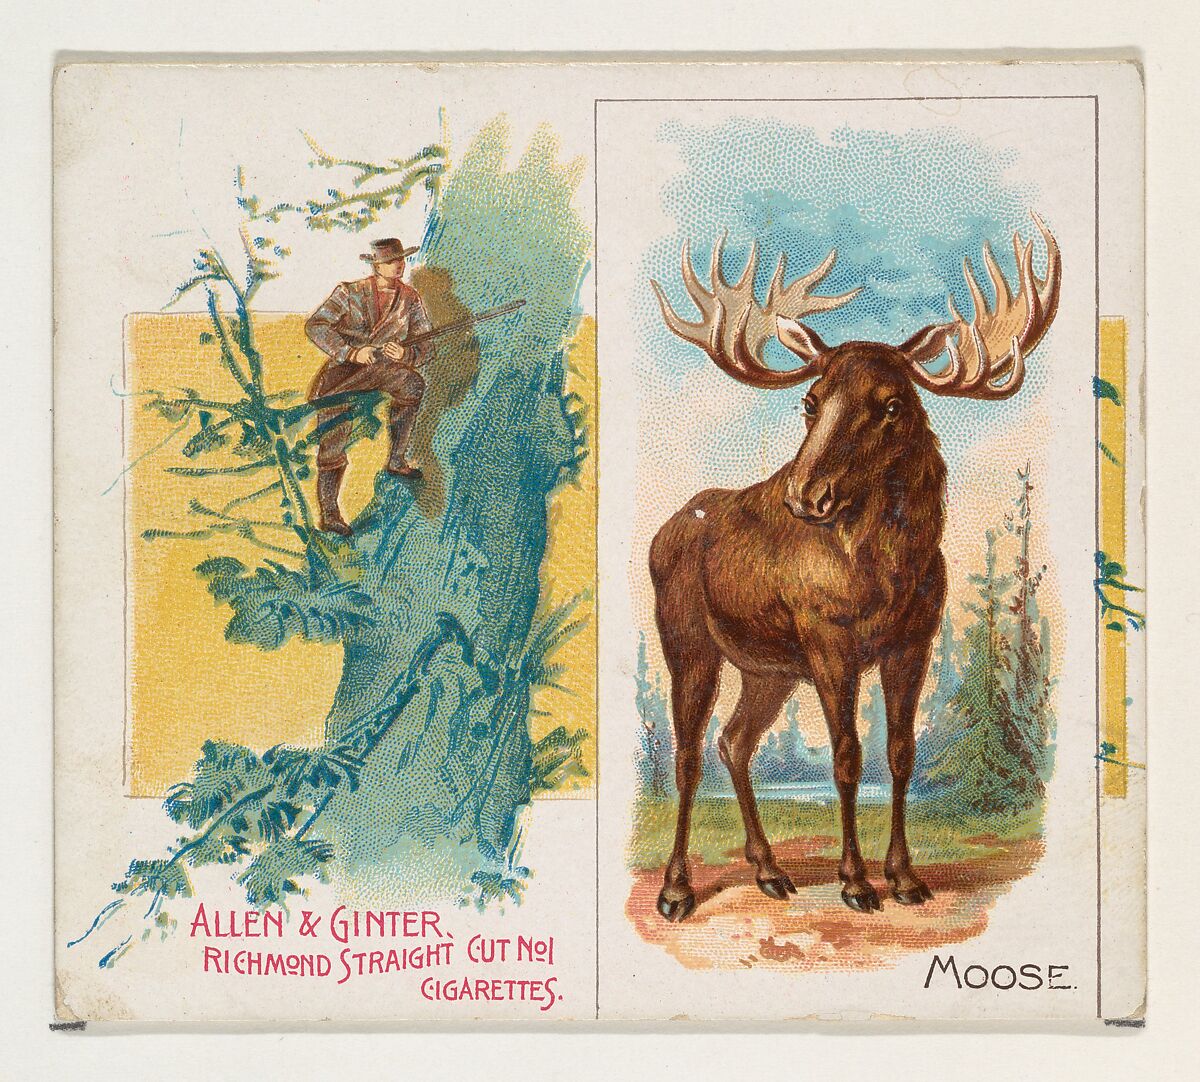 Moose, from Quadrupeds series (N41) for Allen & Ginter Cigarettes, Issued by Allen &amp; Ginter (American, Richmond, Virginia), Commercial color lithograph 